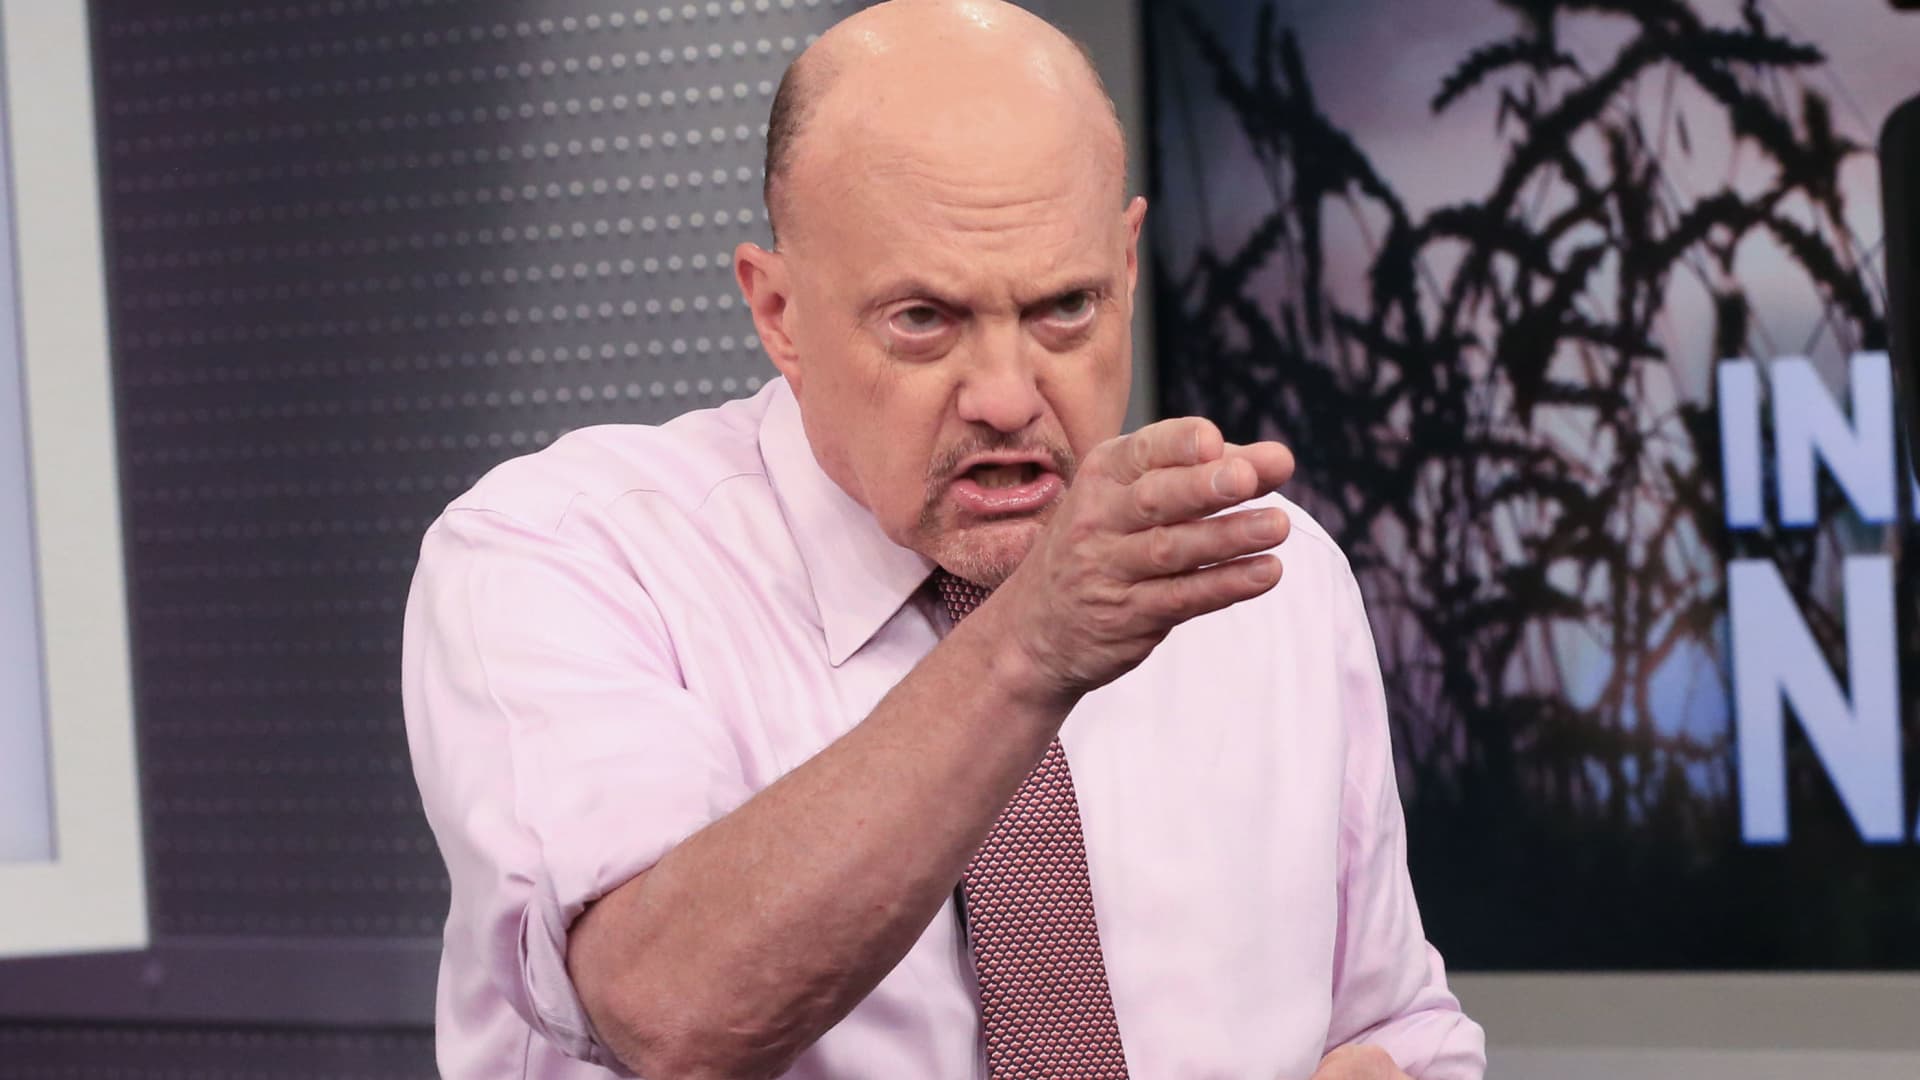 Jim Cramer says strong January jobs report shows the economy can handle more rate hikes - CNBC